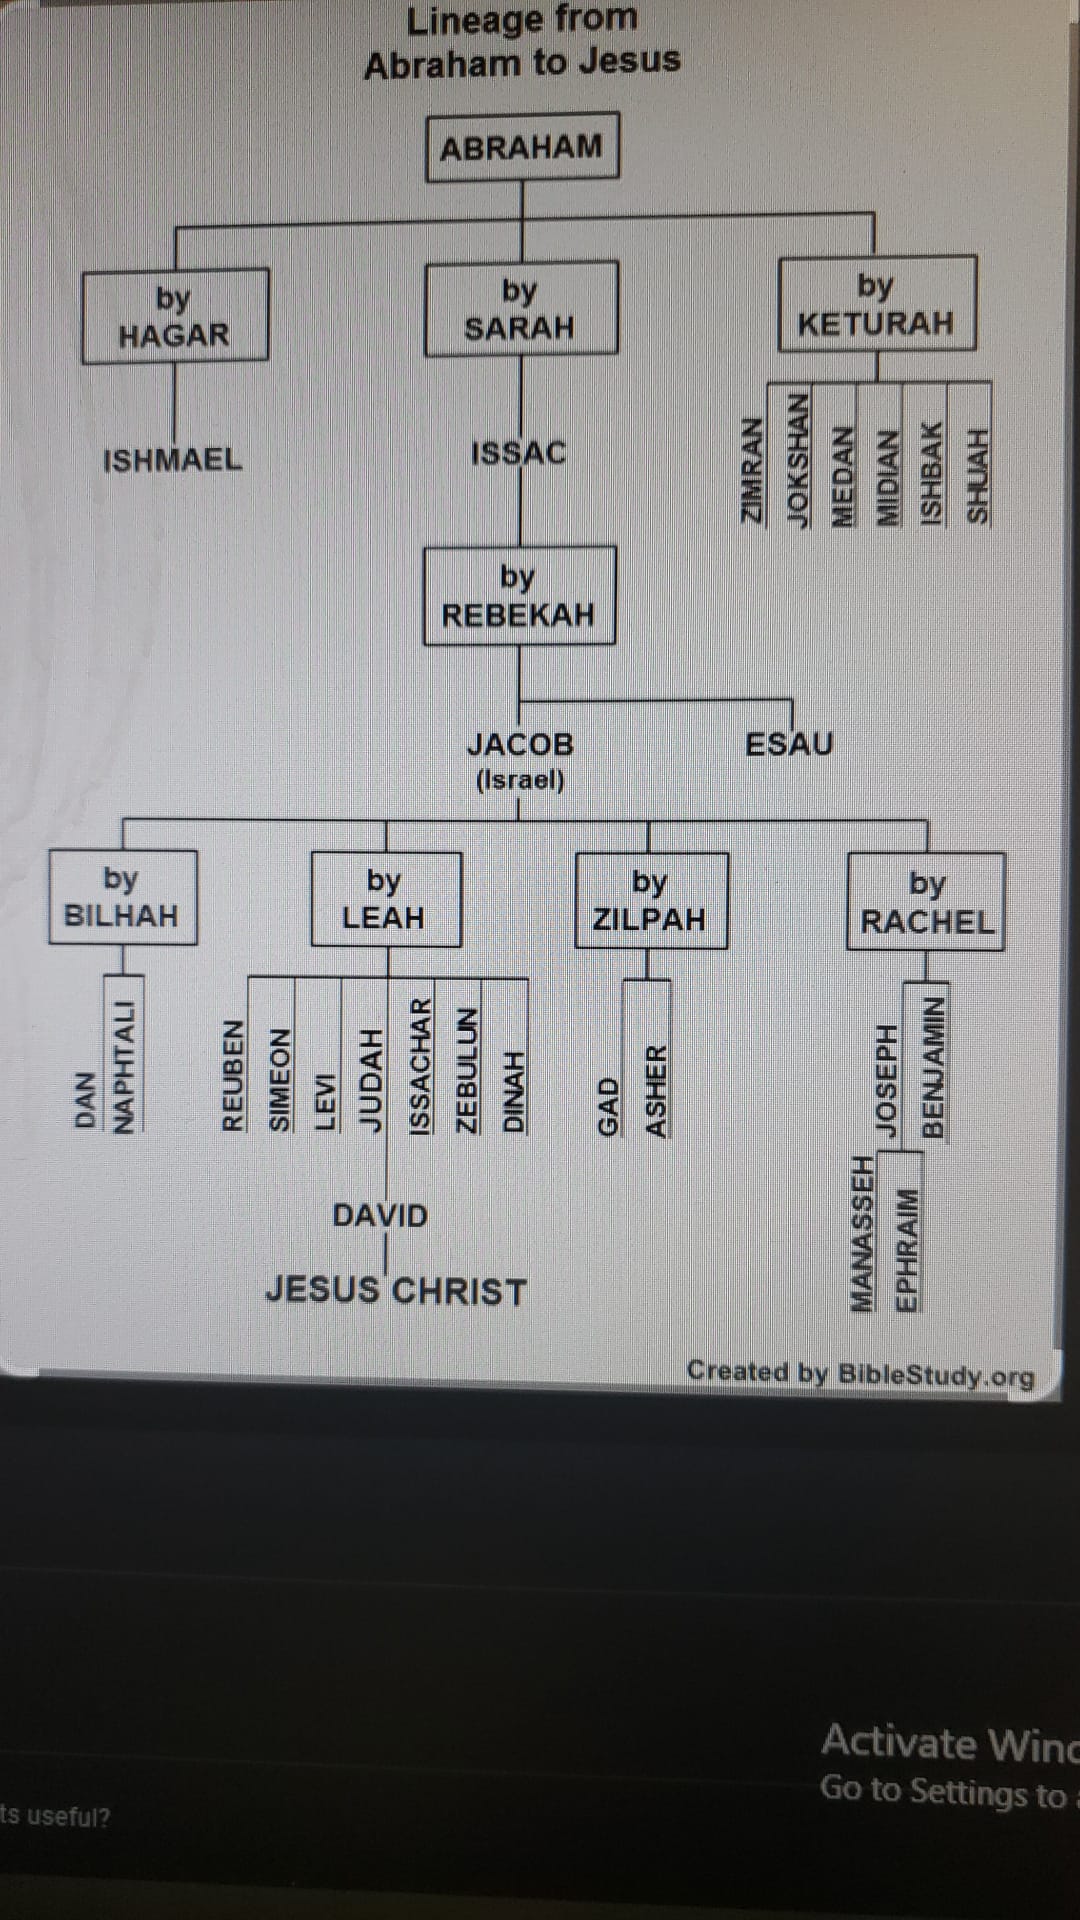 Christian%20lineage